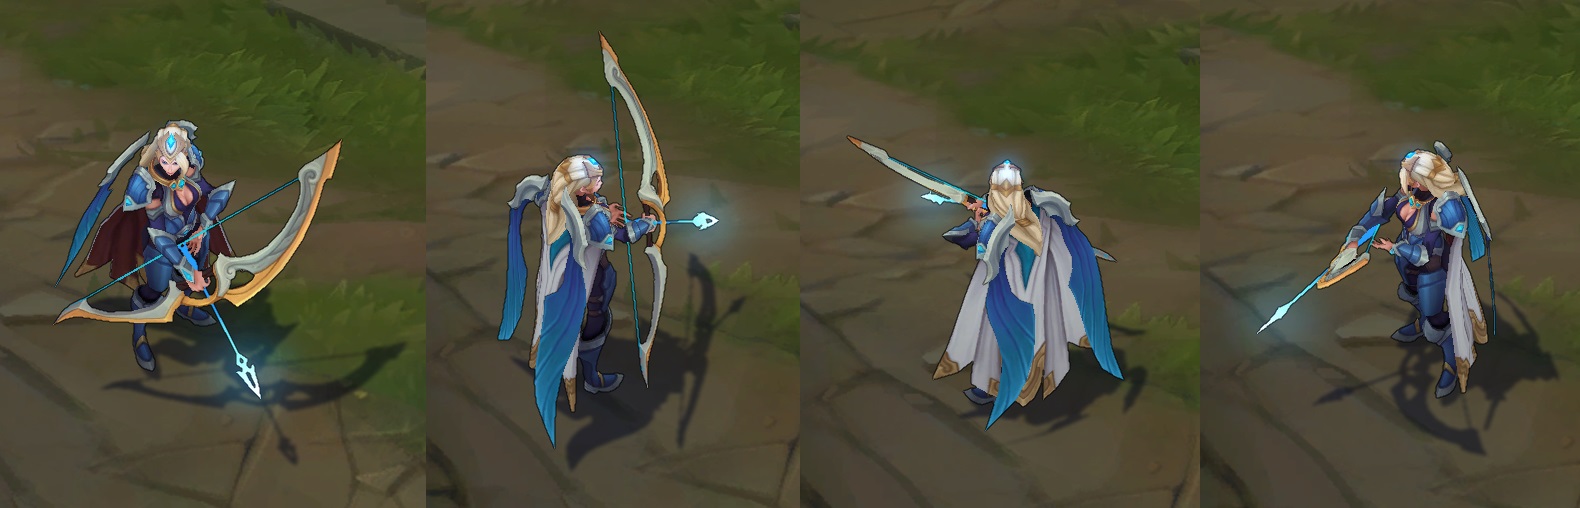 championship ashe skin for league of legends ingame picture